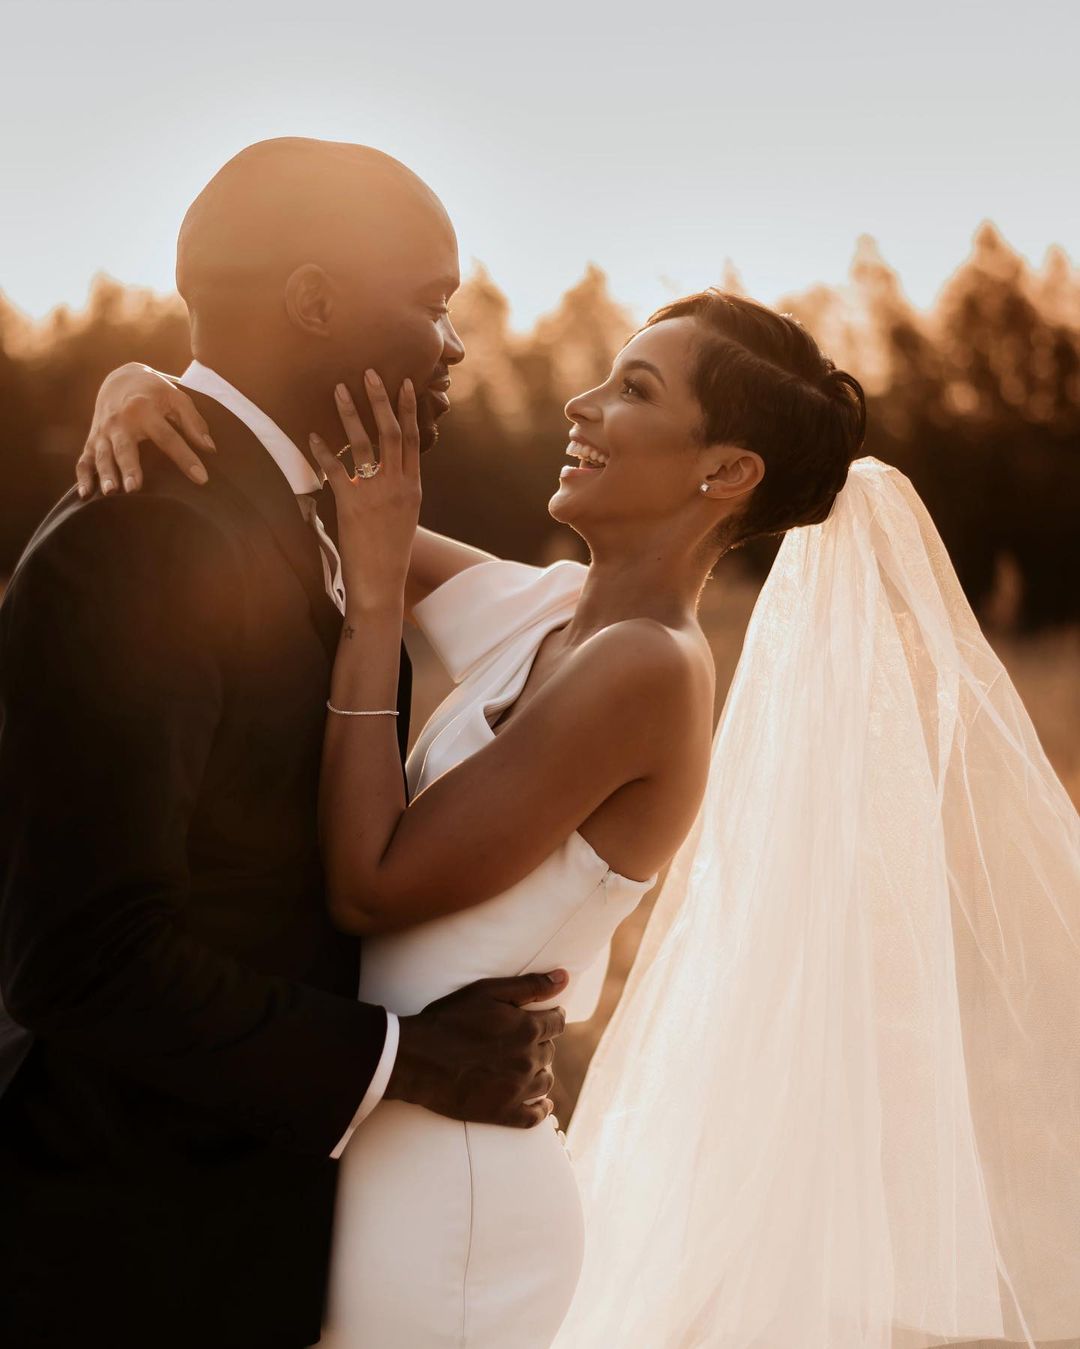 Dr Musa celebrates 2 months wedding anniversary with wife Liesl Laurie